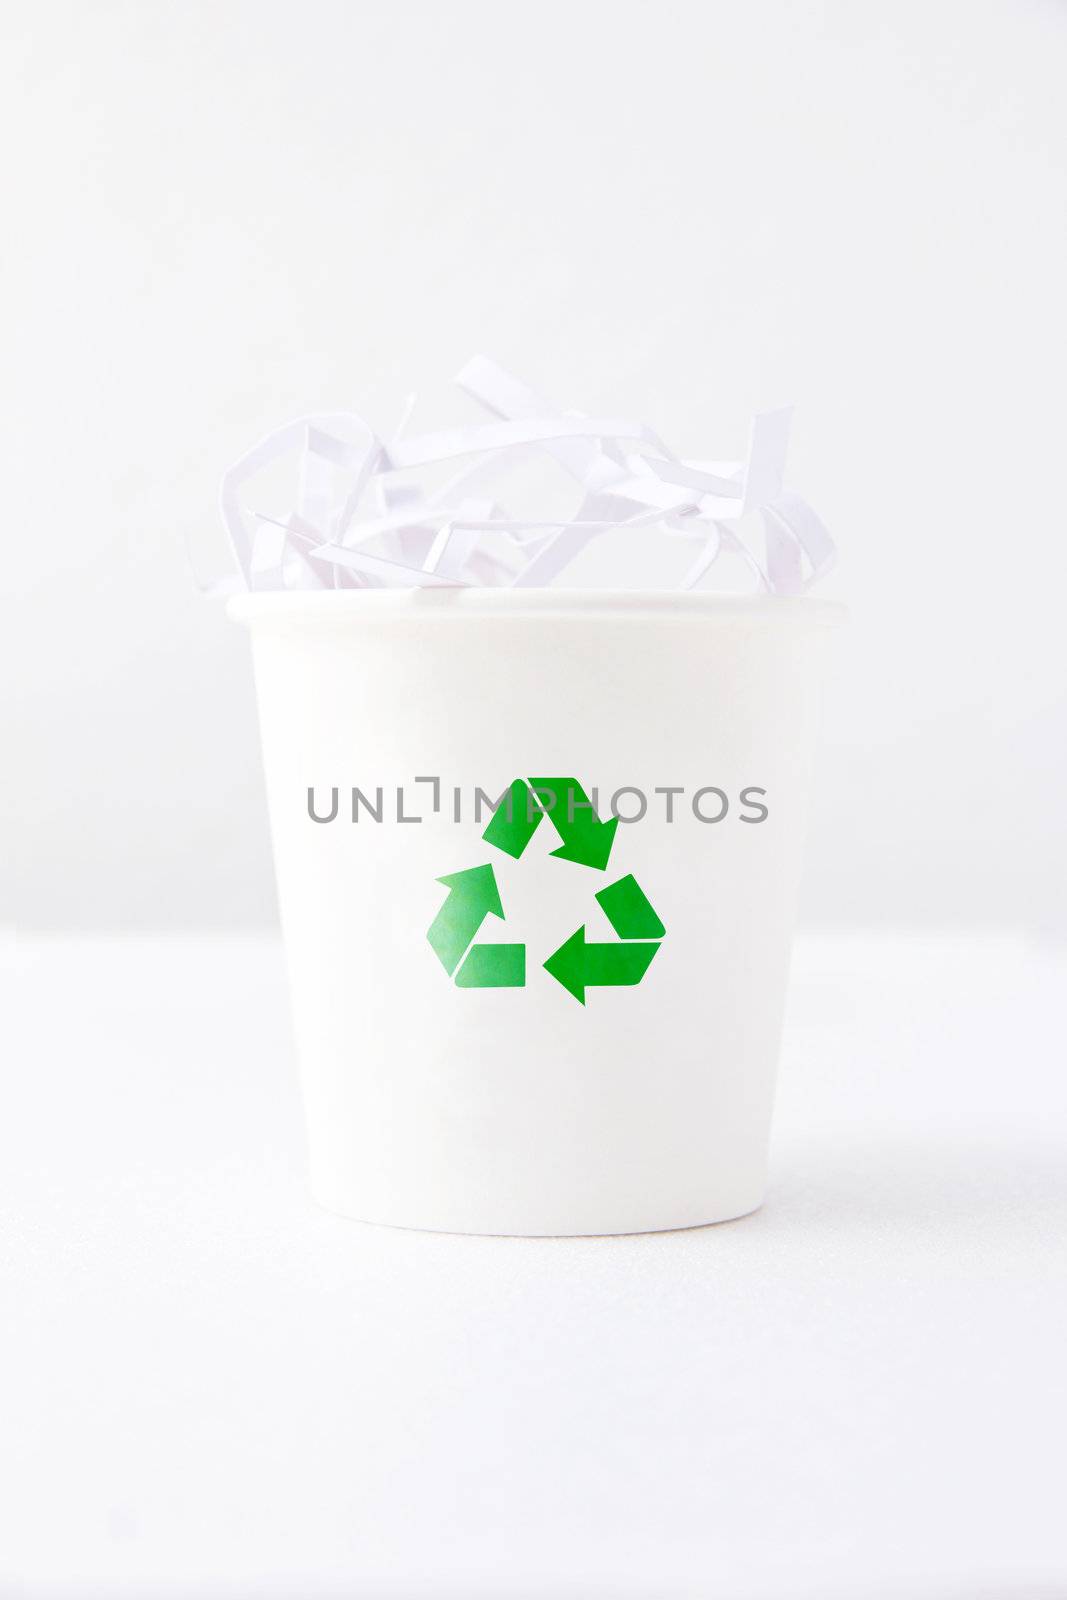 recycle bin concept by ponsulak